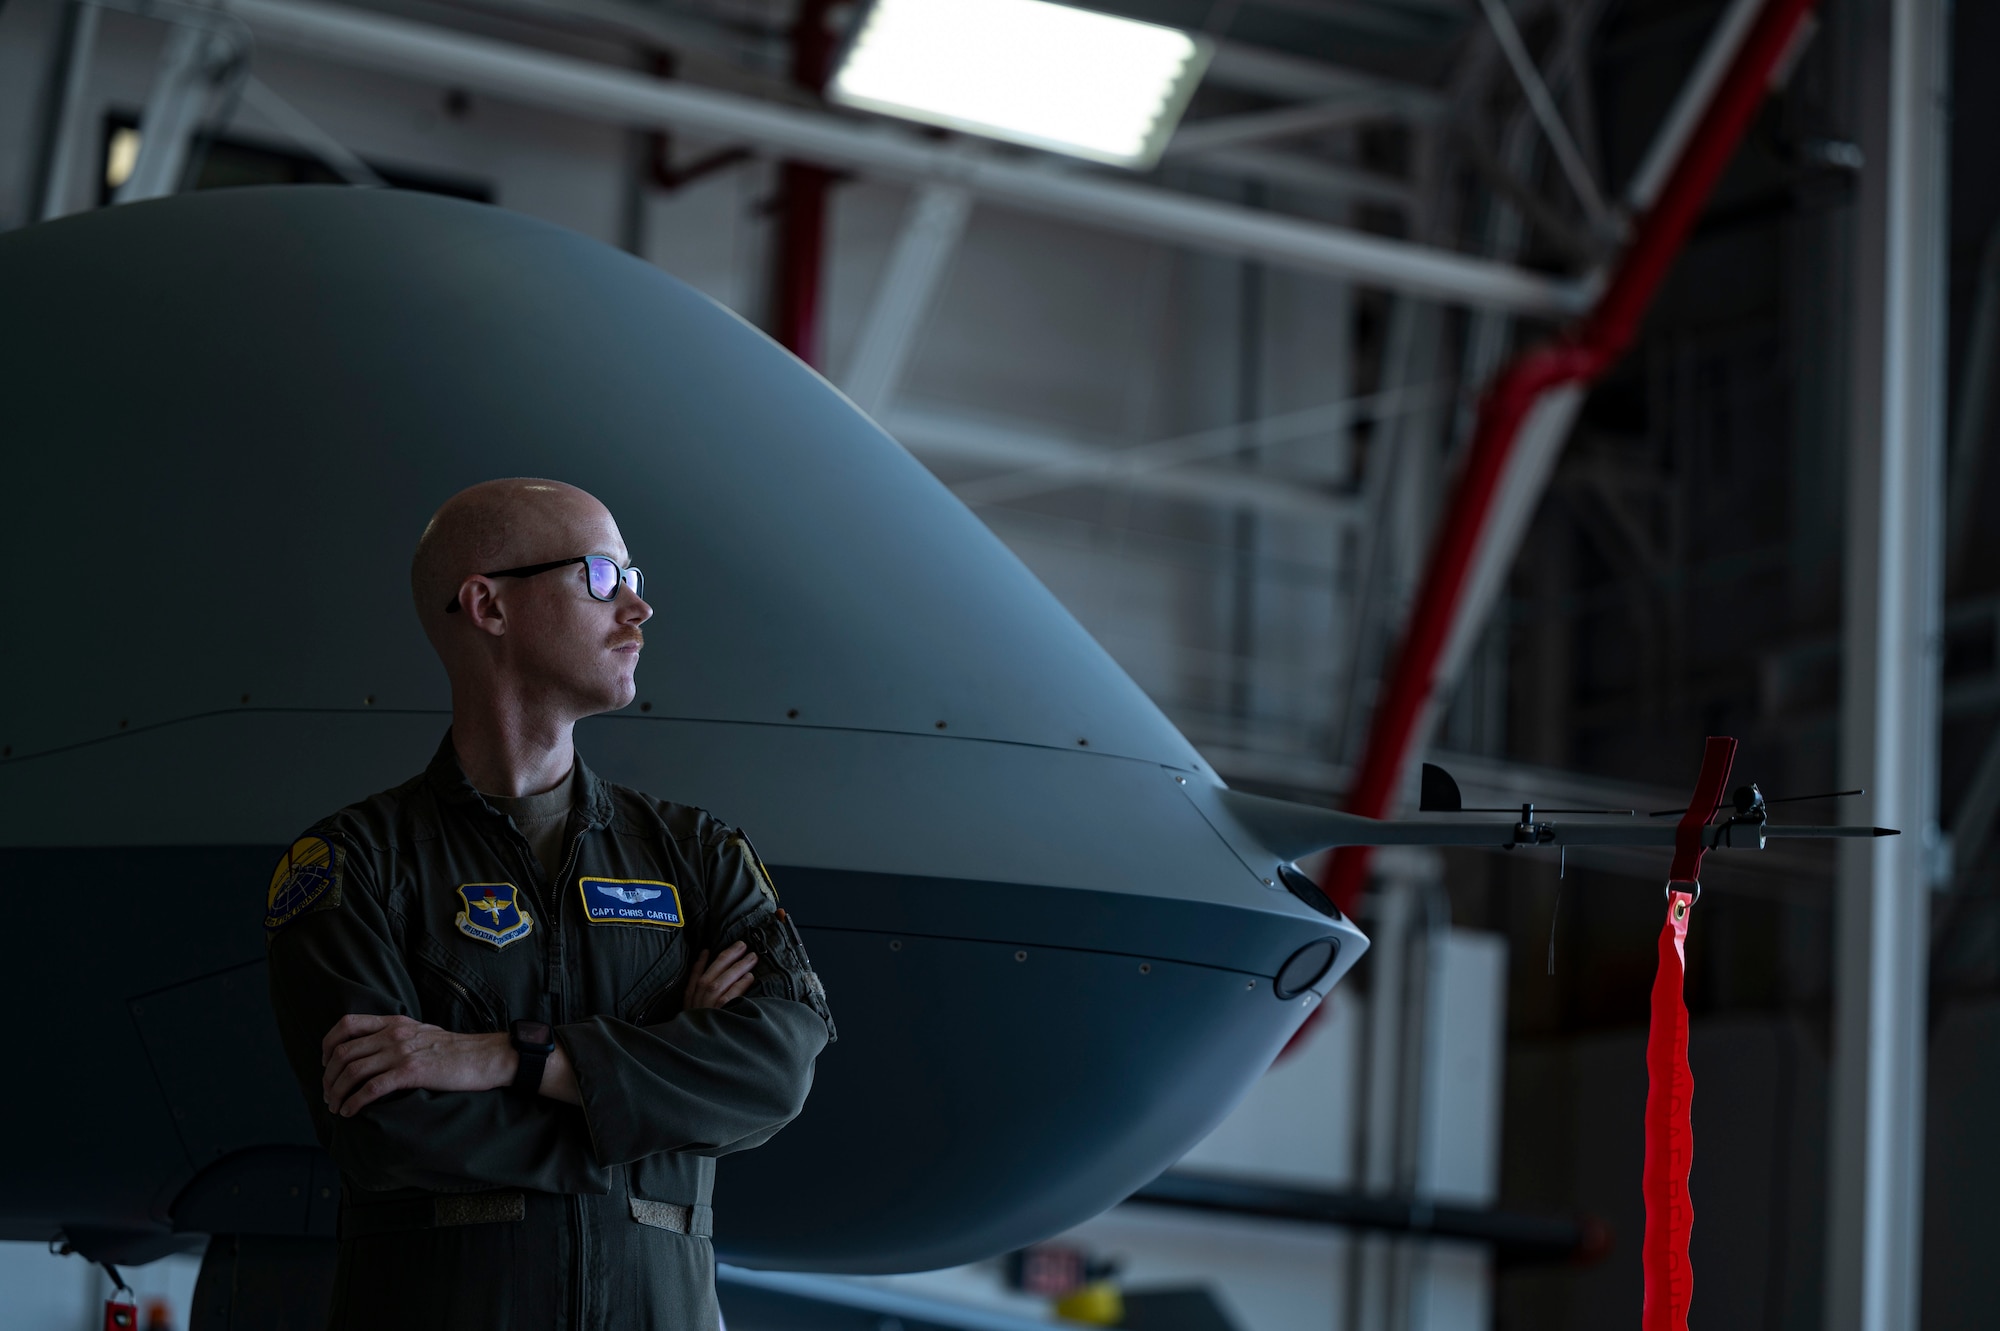 U.S. Air Force Capt. Christopher Carter, 491st Attack Squadron MQ-9 Reaper instructor pilot, poses in front of an MQ-9 at Hancock Field Air National Guard Base, New York, June 22, 2023. The 491st ATKS instructors train MQ-9 student pilots and sensor operators in real-world combat circumstances that will be present in operational environments. (U.S. Air Force photo by Airman 1st Class Isaiah Pedrazzini)